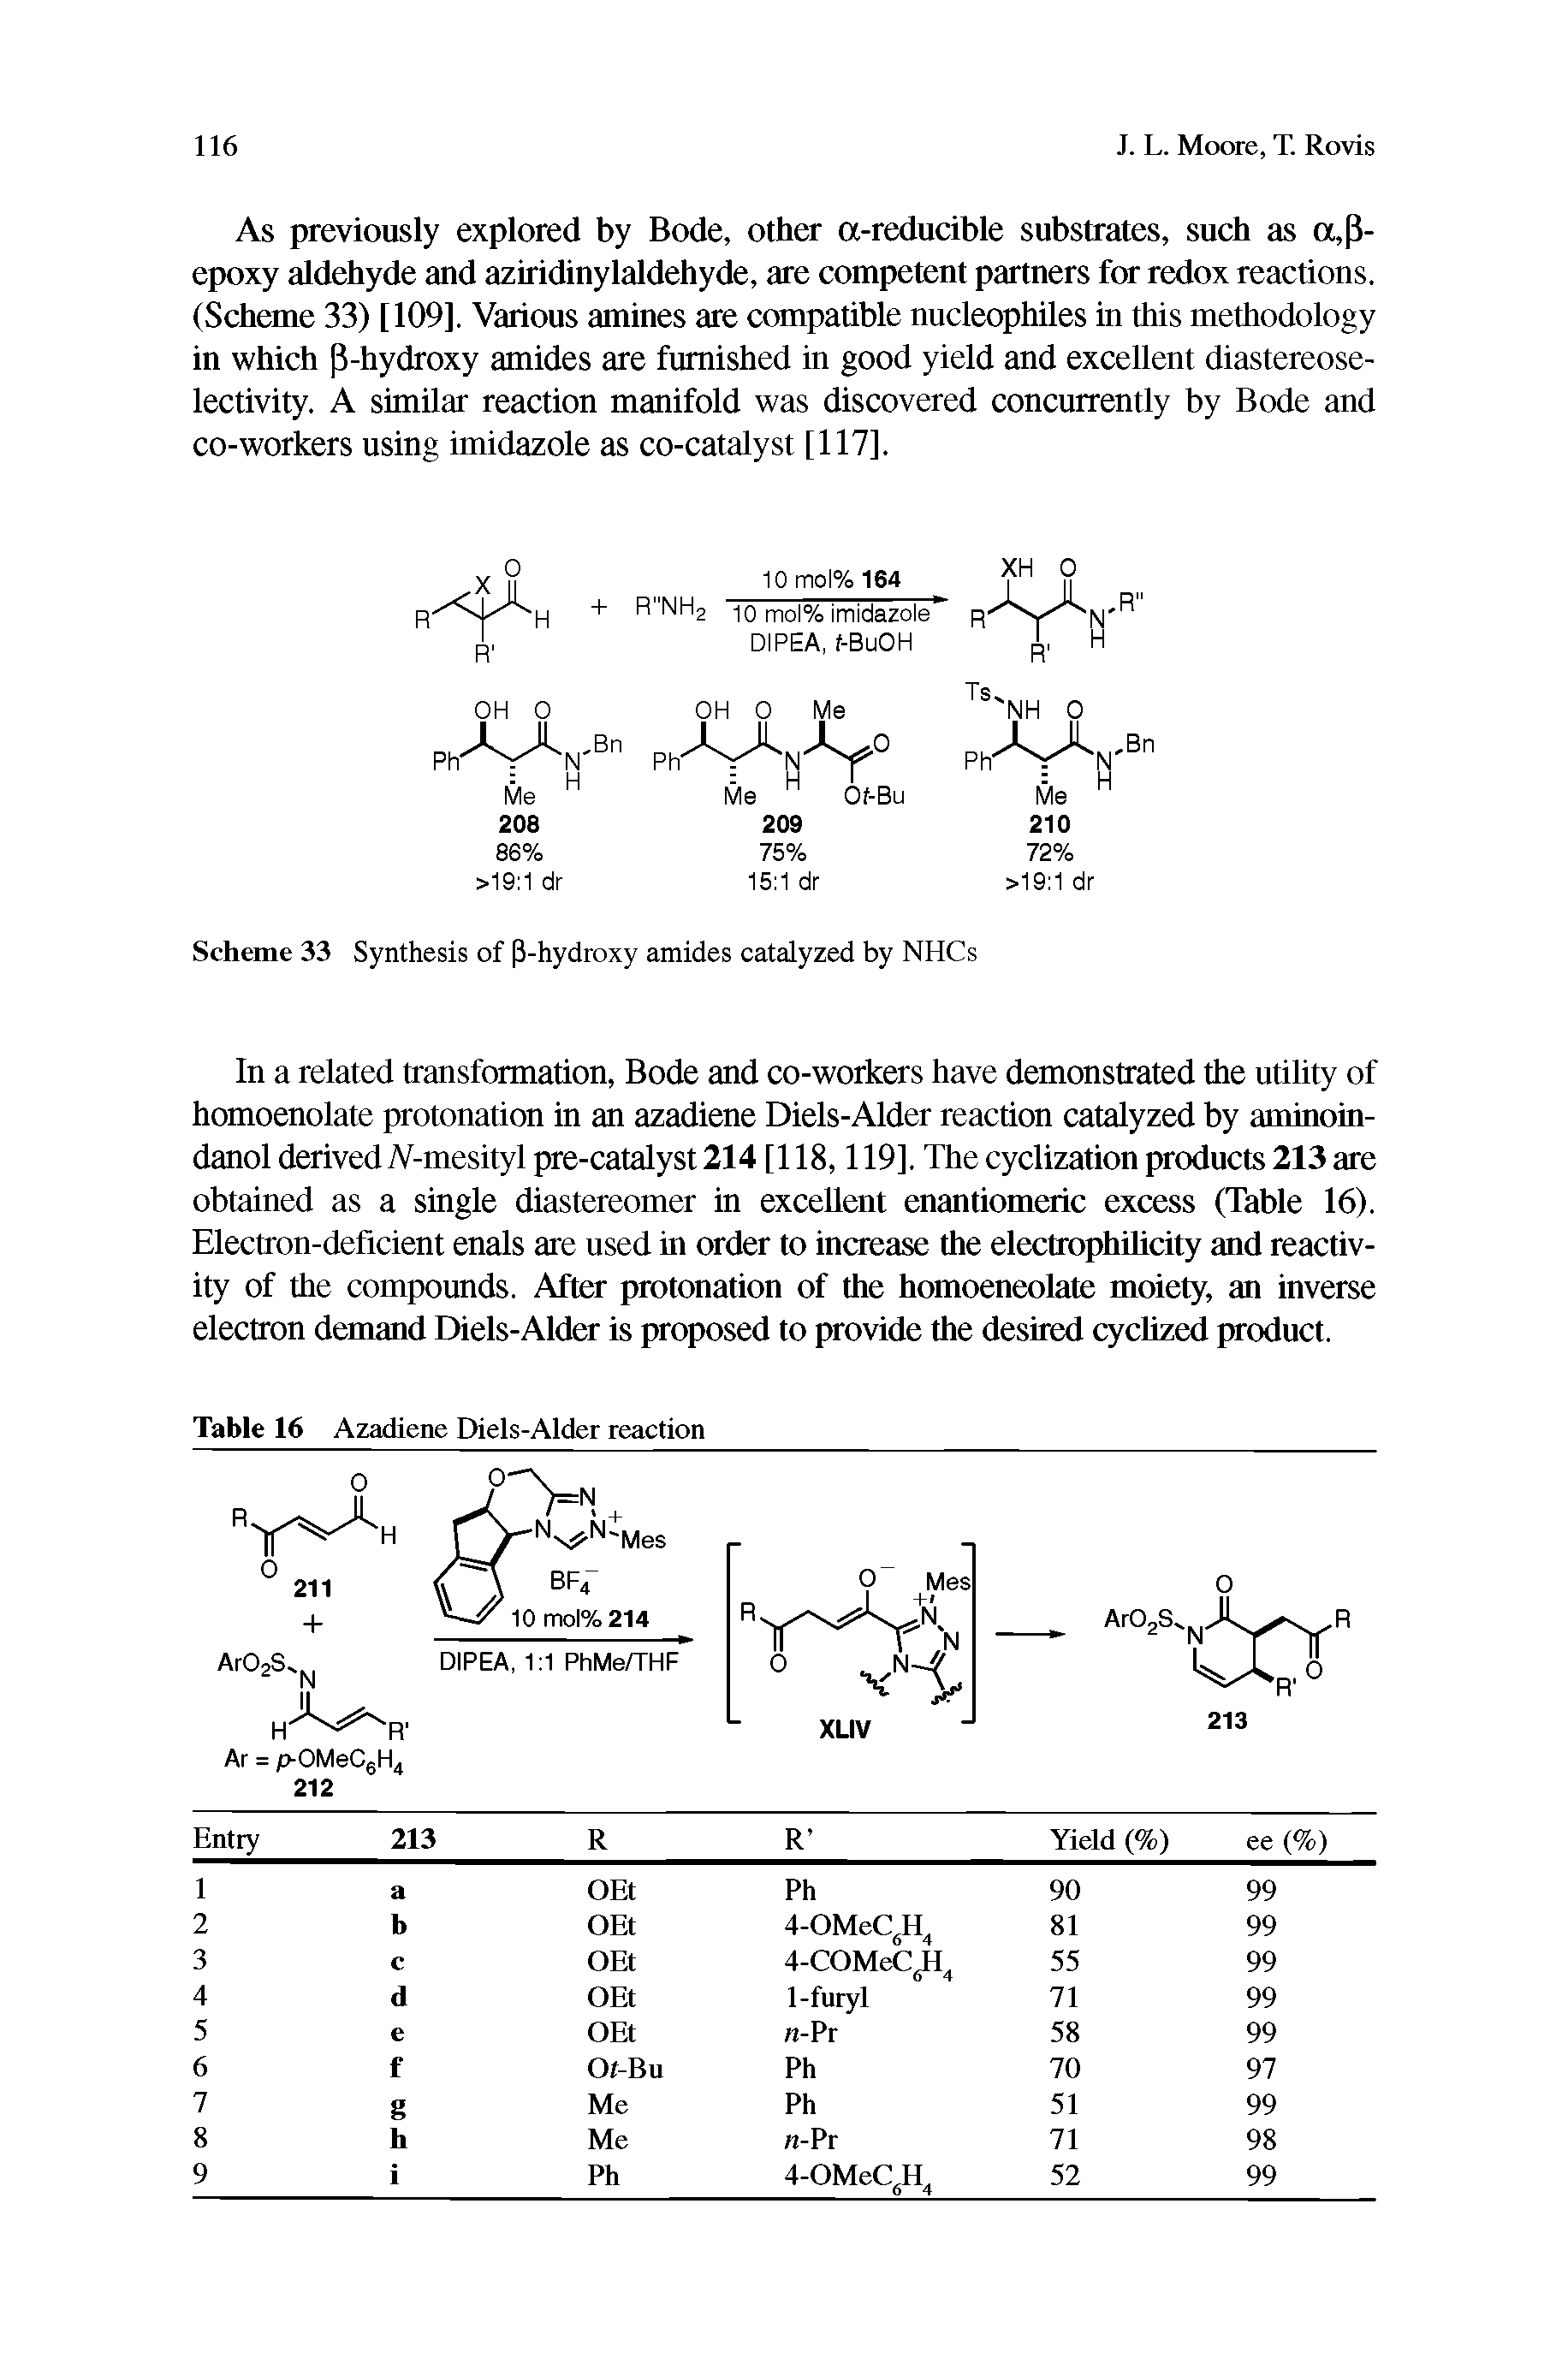 Scheme 33 Synthesis of 3-hydroxy amides catalyzed by NHCs...